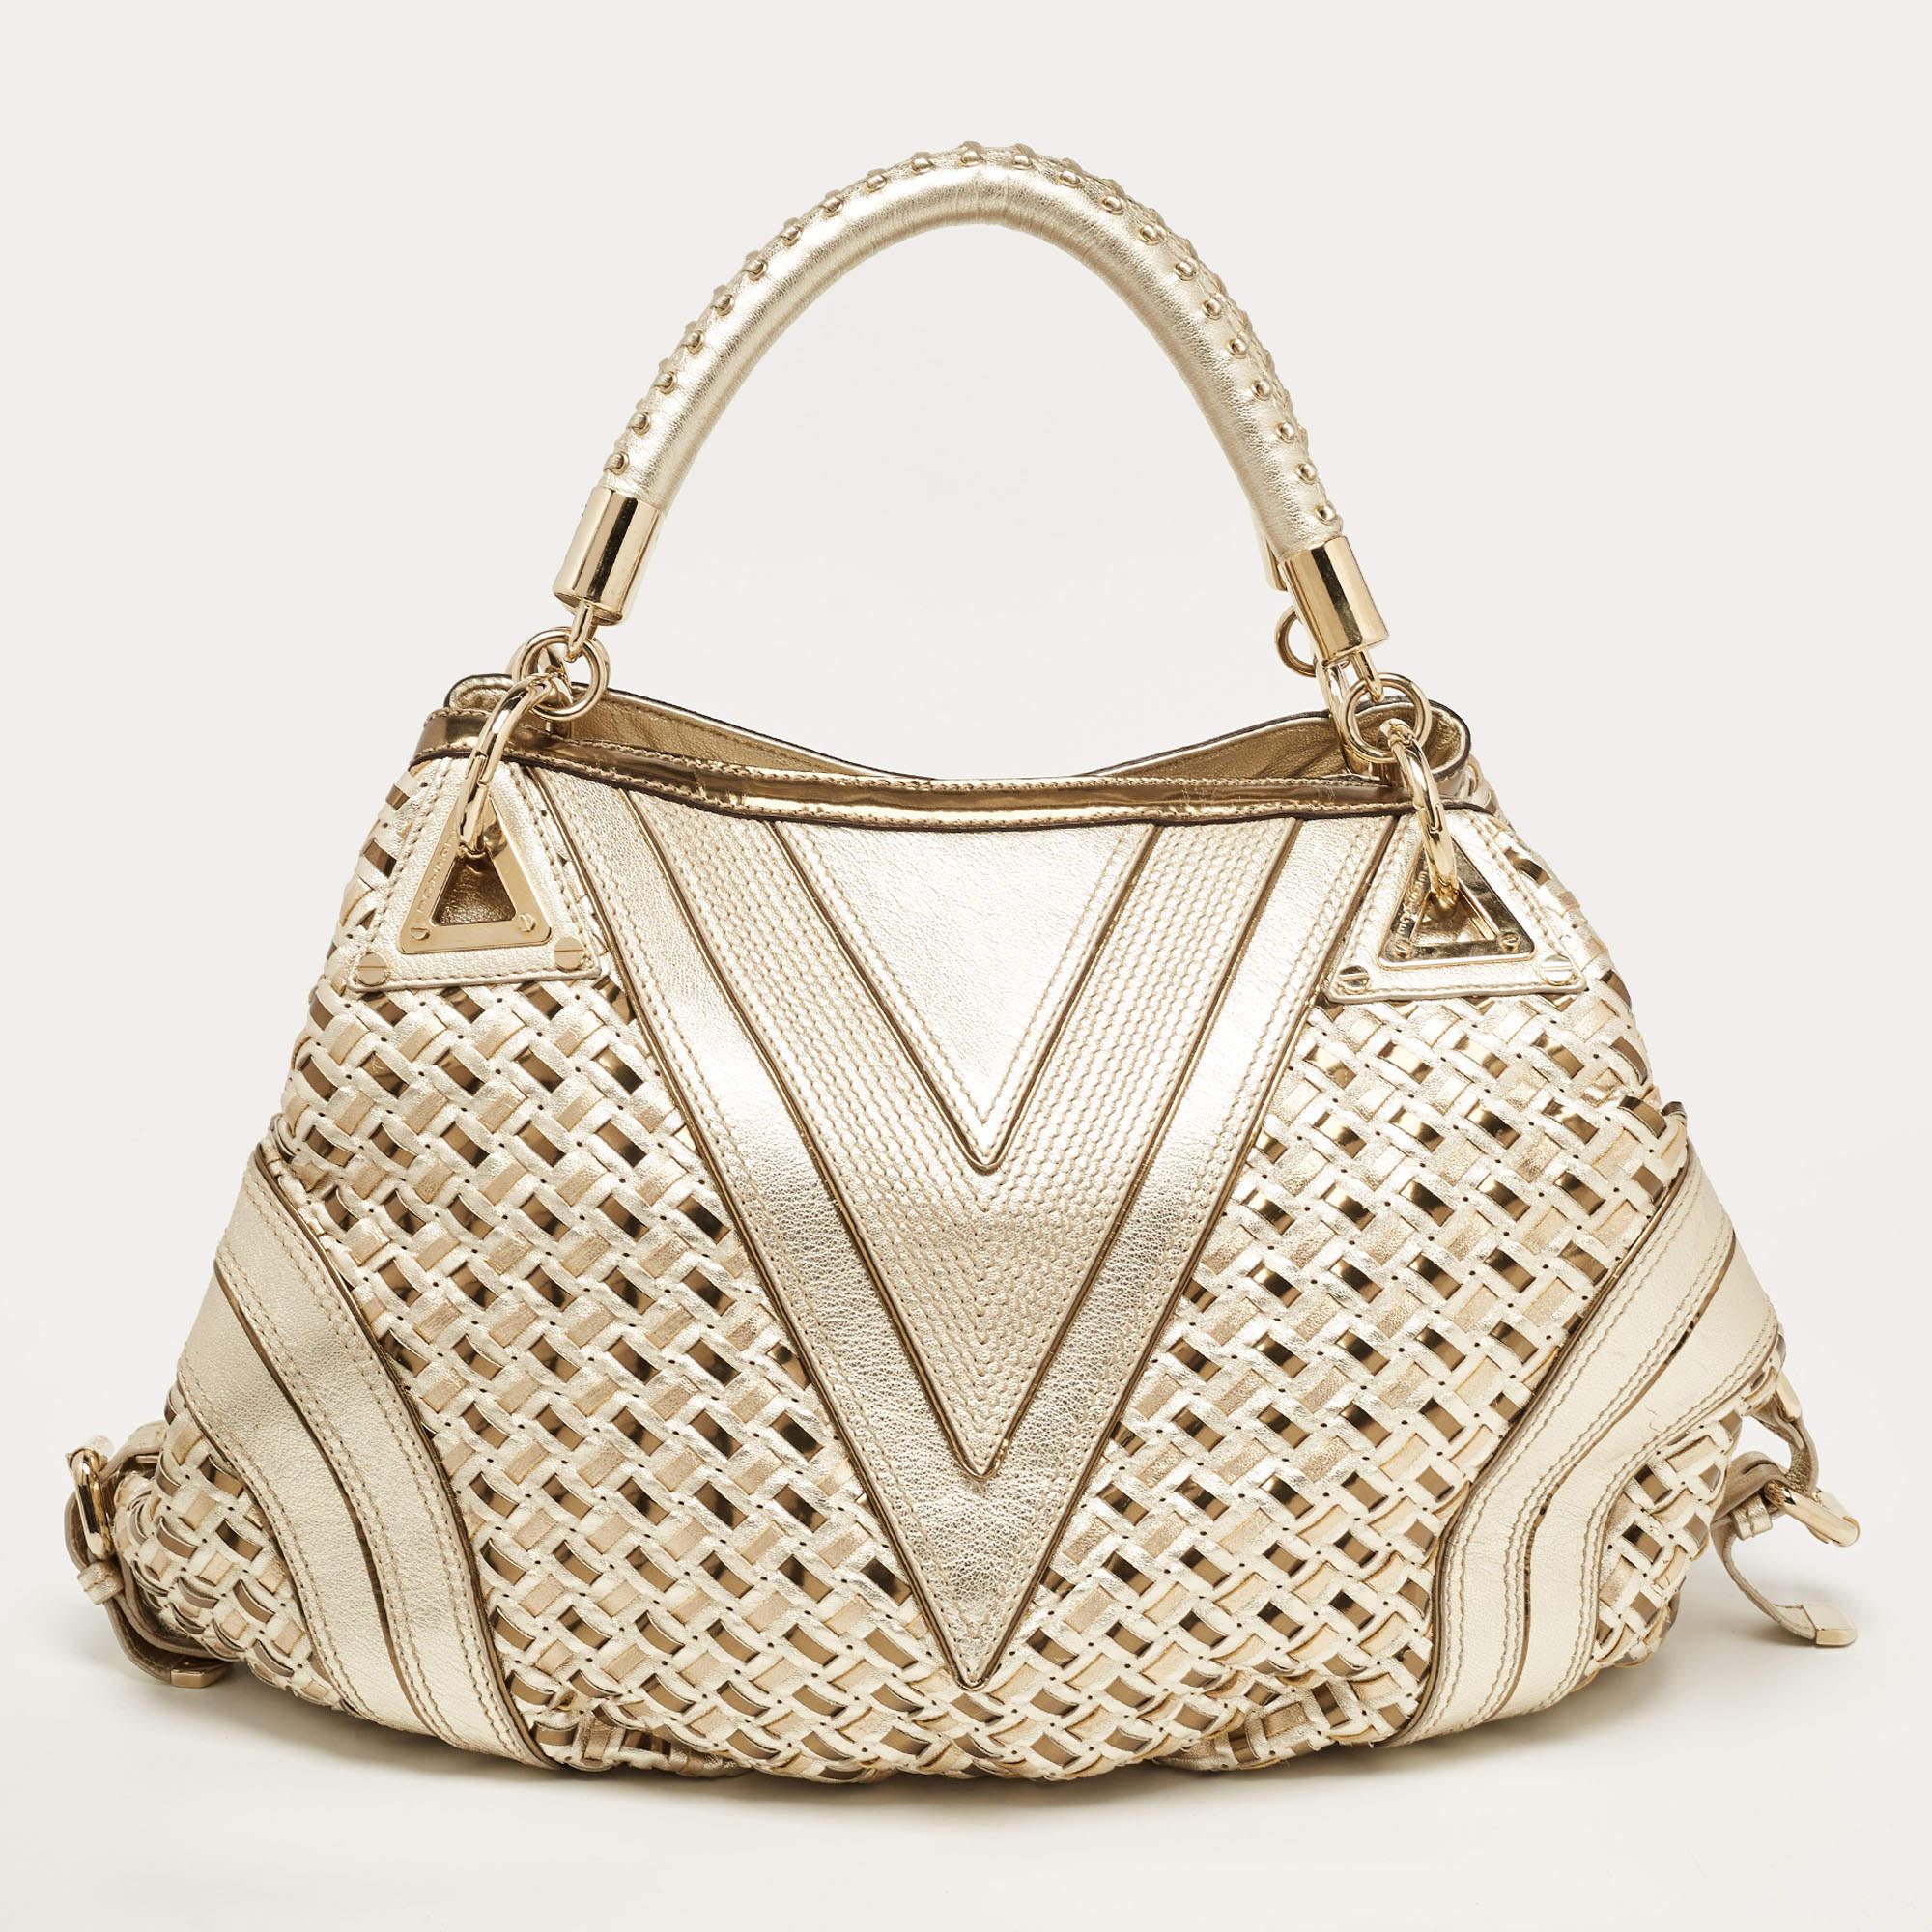 This satchel is built to hold your essentials in the most fashionable way! Easy to style, well-made using the best materials, and coming from a coveted brand, the Versace satchel will add immense style to your ensemble.

